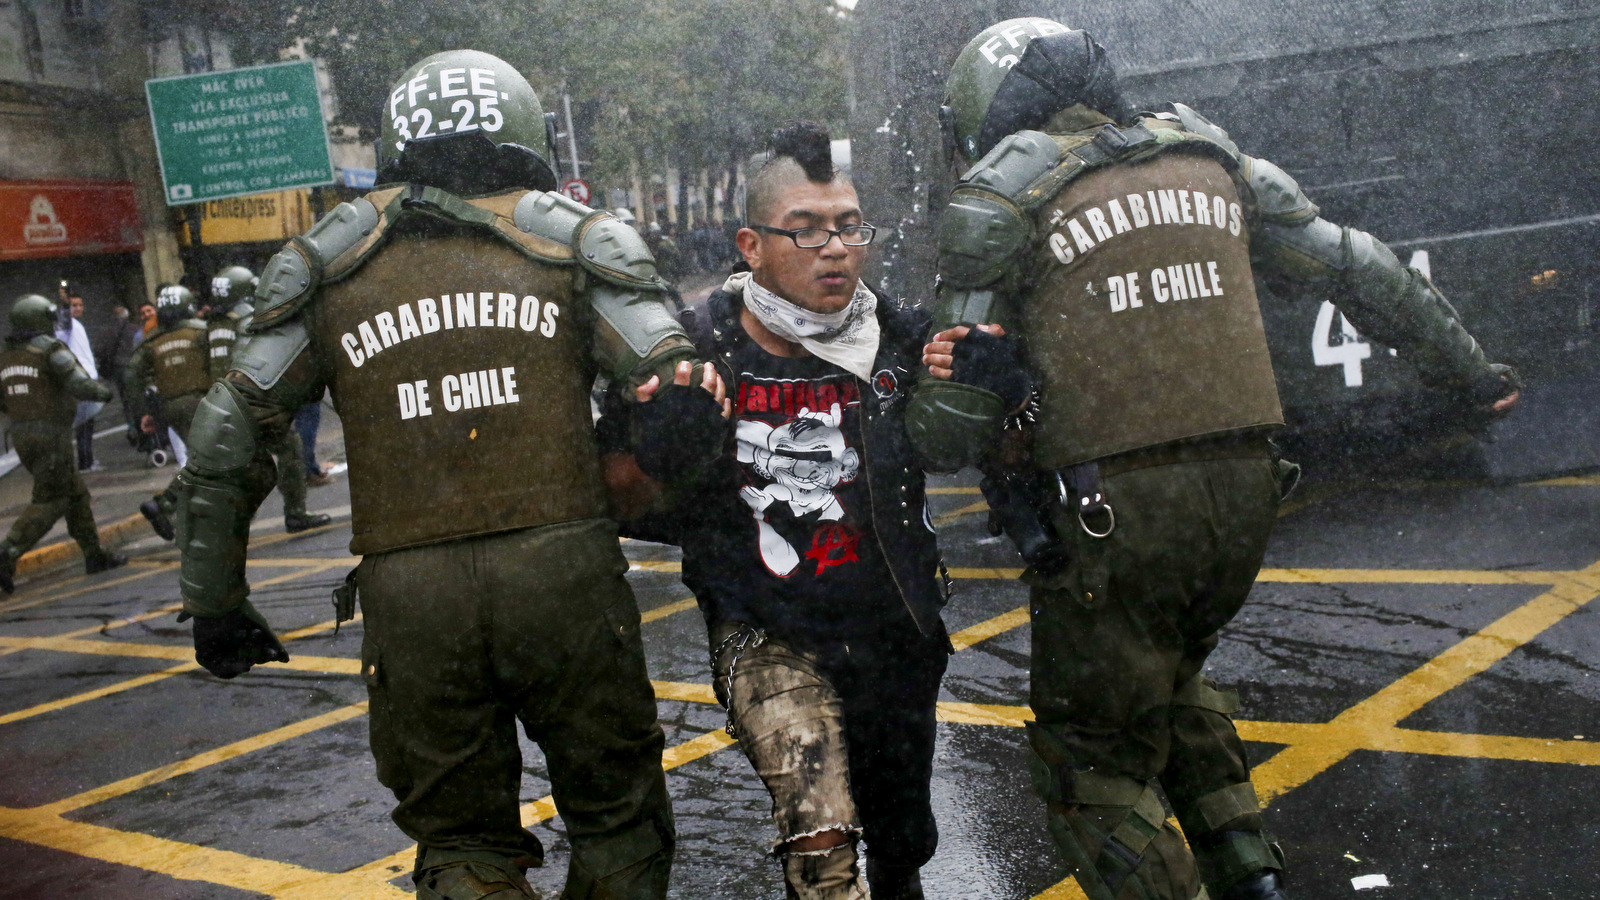 A student is detained by police after throwing an object at them during a protest march demanding the government overhaul the education funding system that would include canceling their student loan debt, in Santiago, Chile, May 9, 2017. Some students stay in debt for up to 20 years after completing their studies. (AP/Esteban Felix)